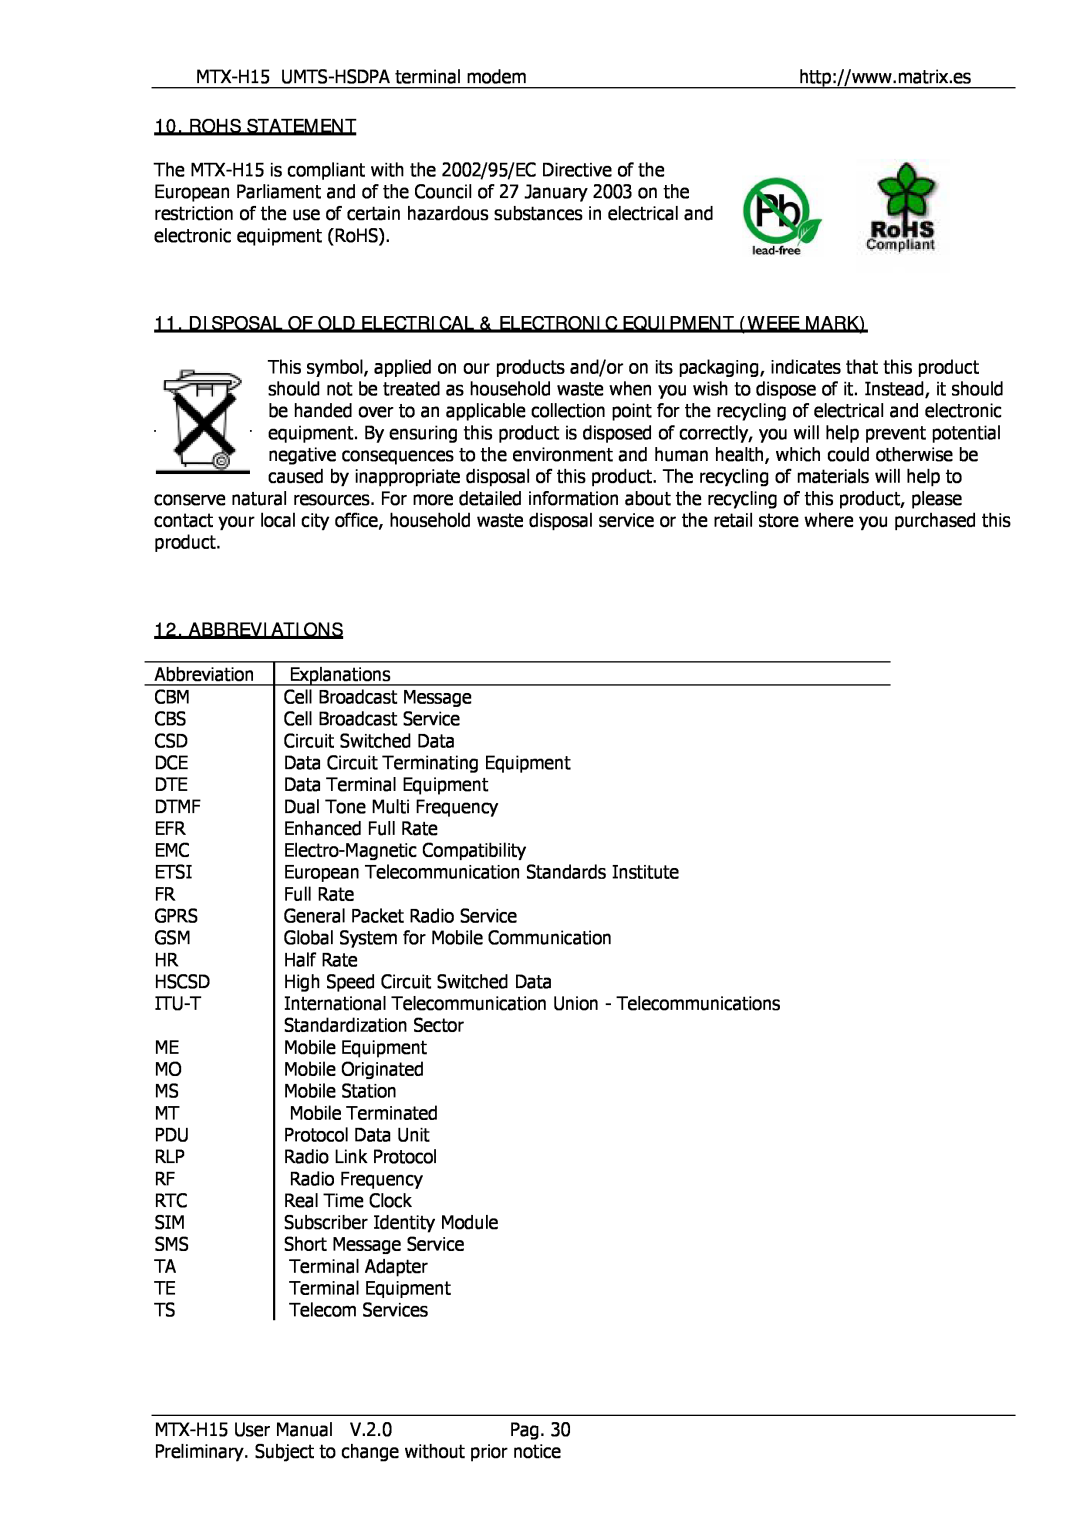 Siemens MTX-H15 user manual Rohs Statement, Disposal Of Old Electrical & Electronic Equipment Weee Mark, Abbreviations 